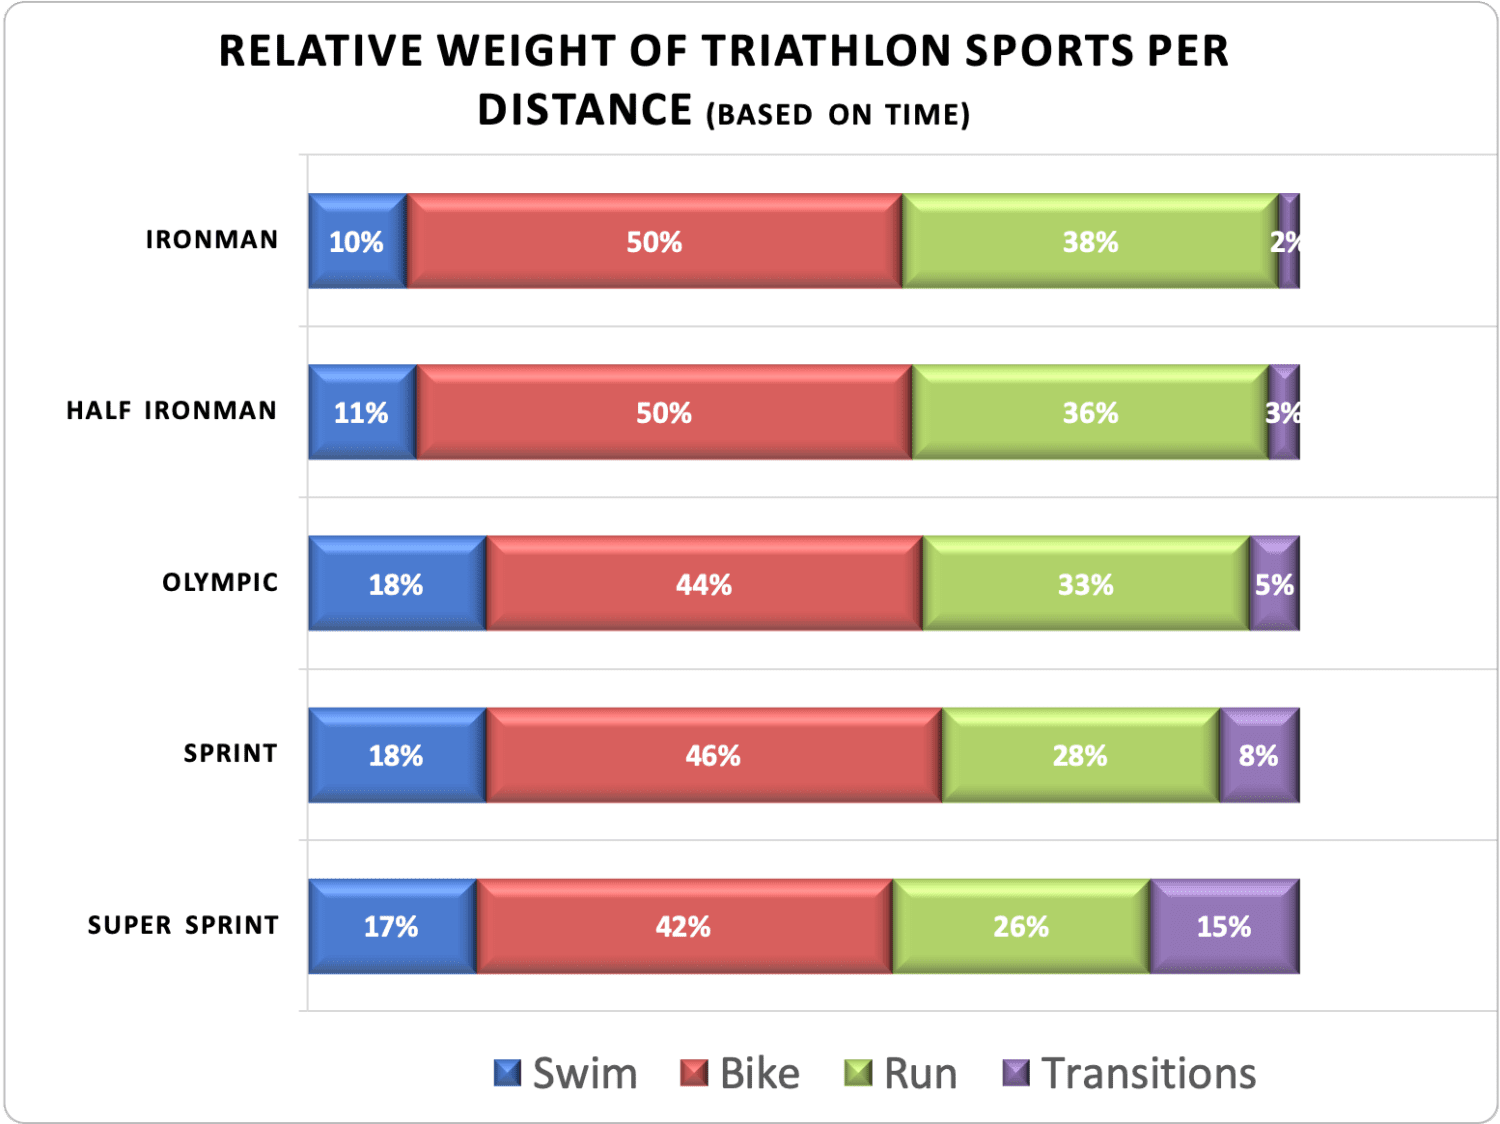 Relative weight of triathlon sports per distance based on time